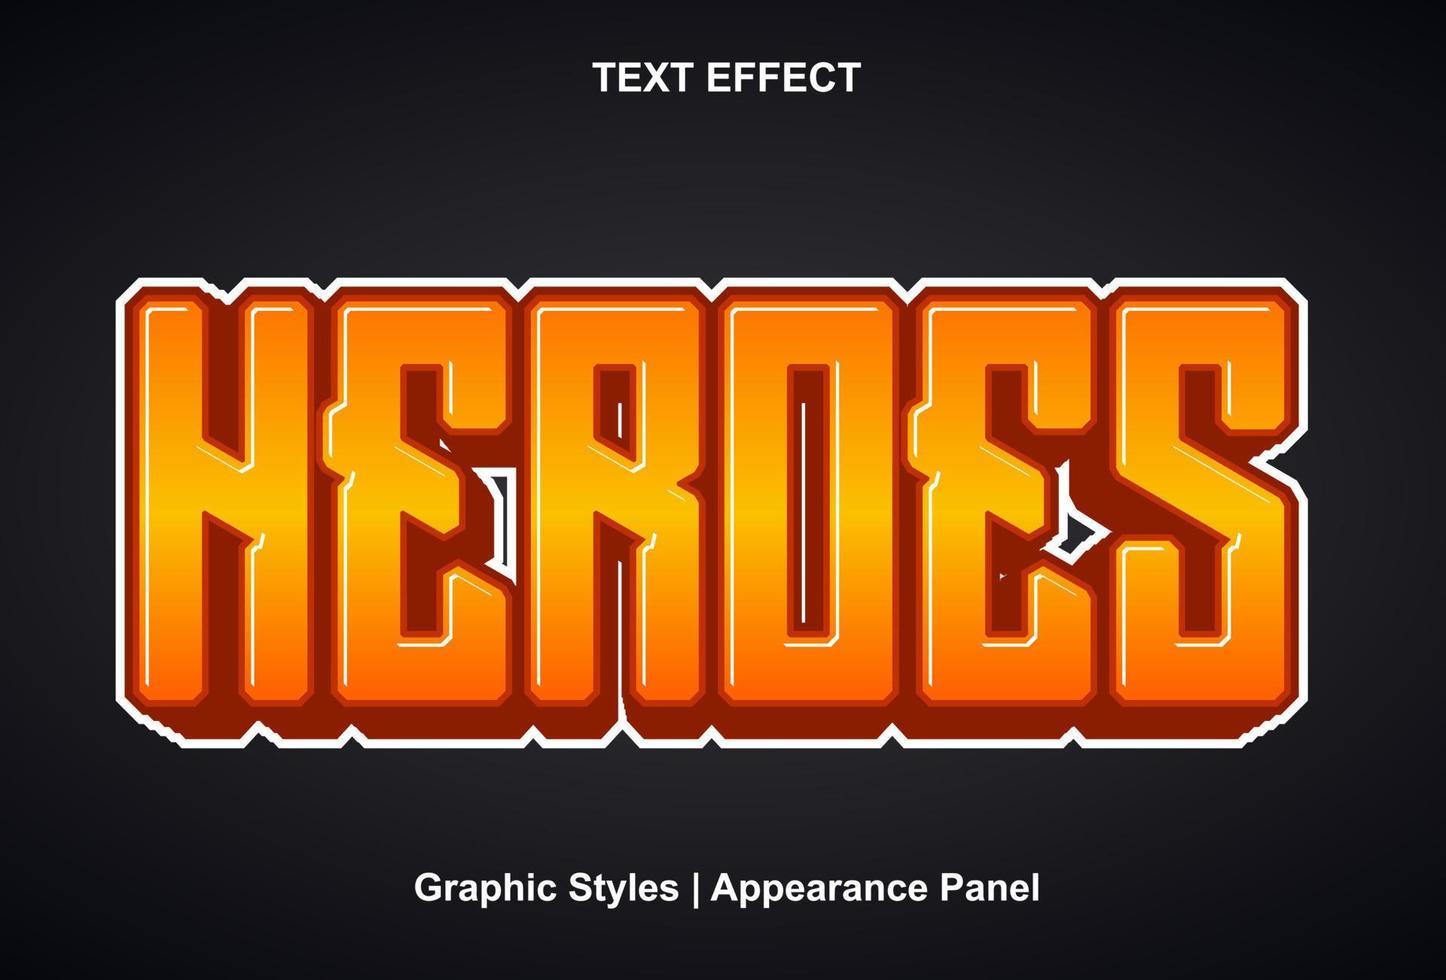 heroes text effect and can be edited. vector